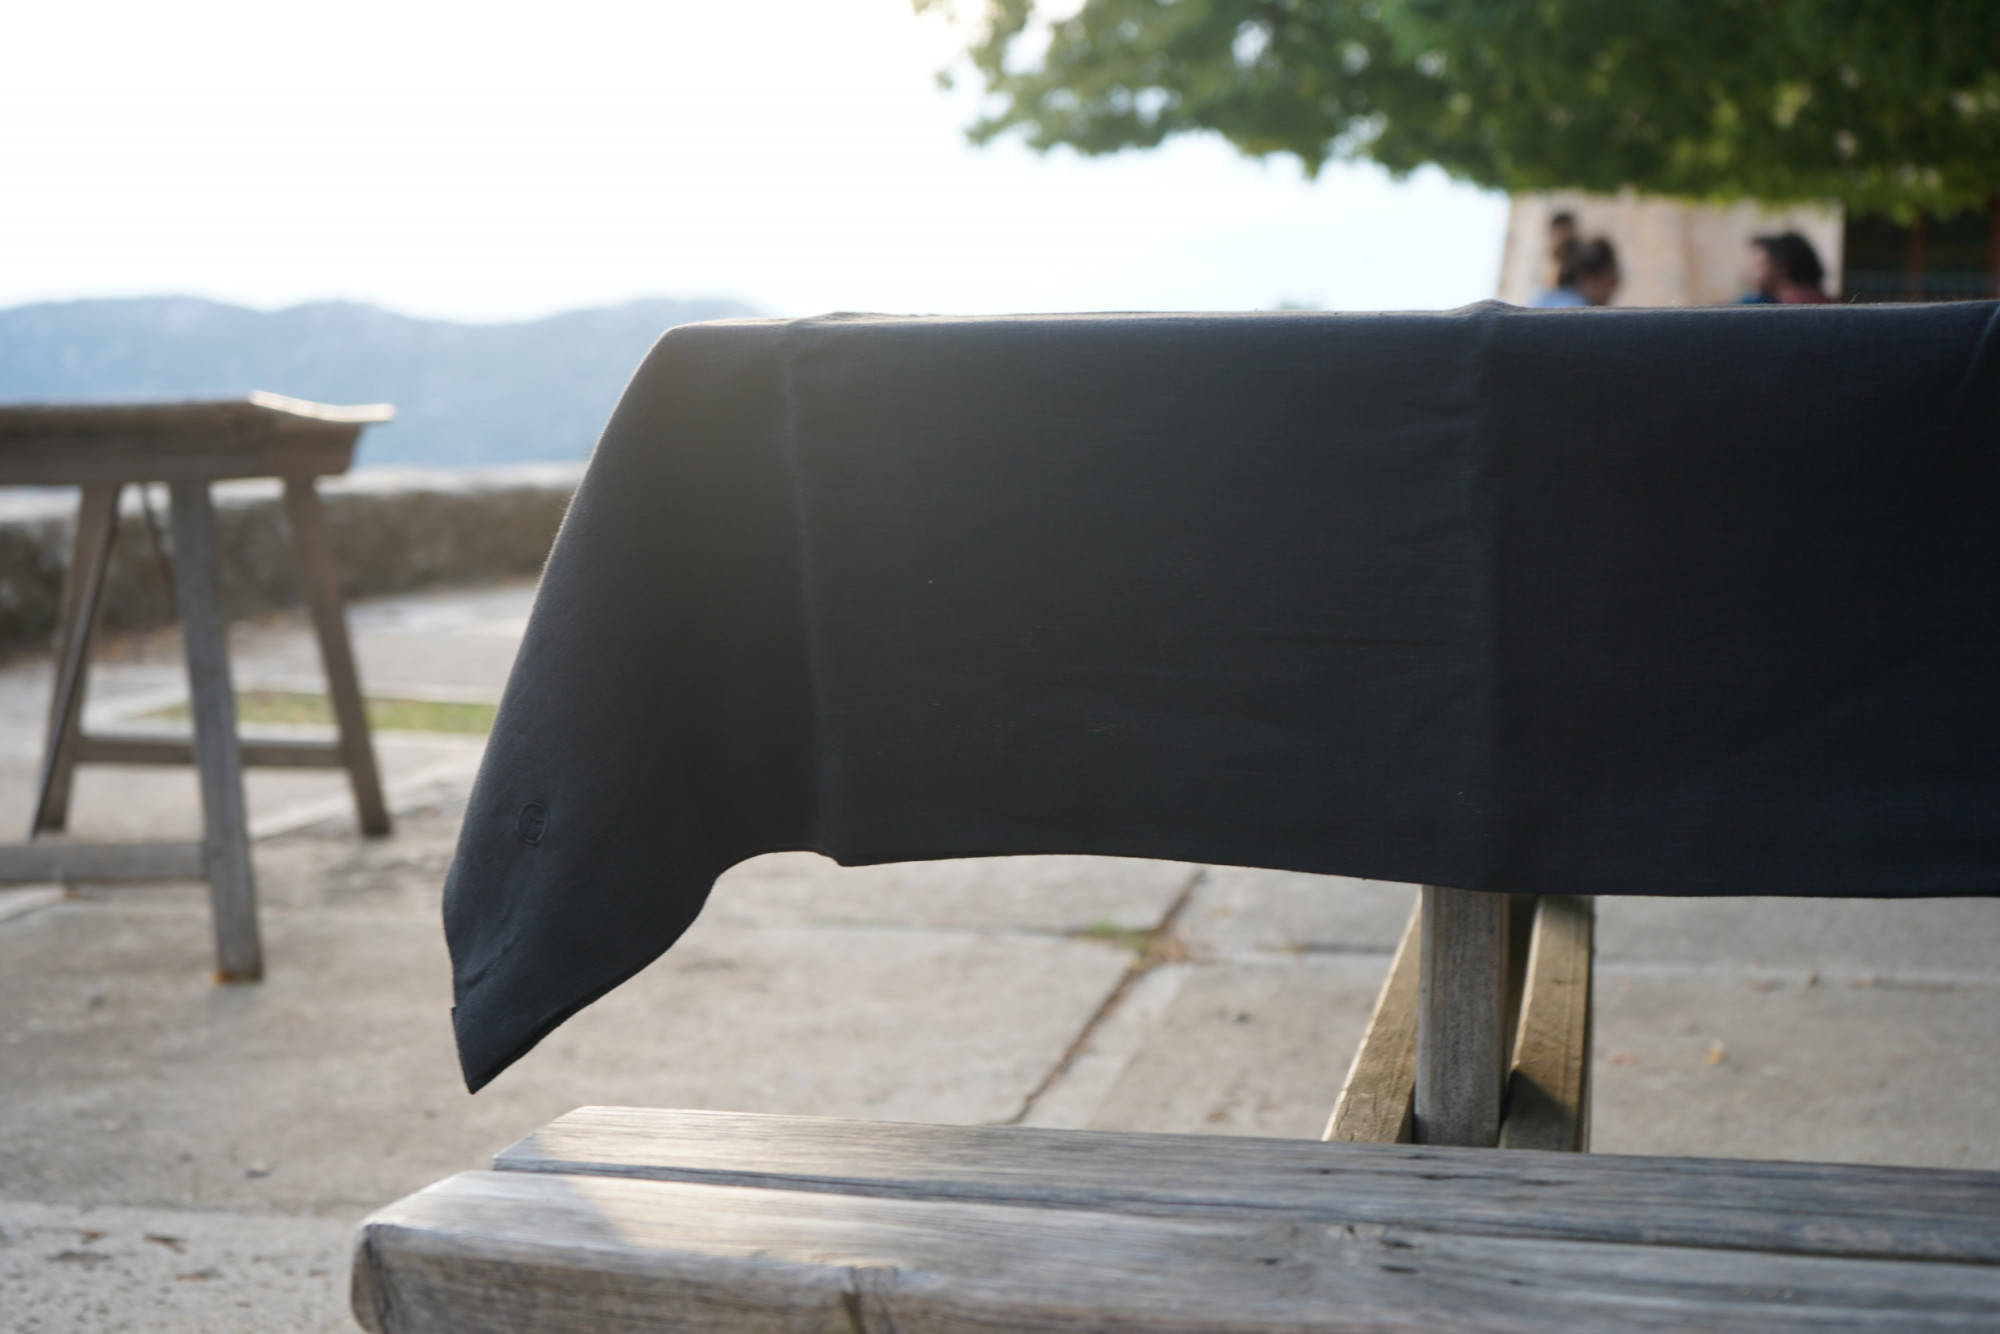 Linen Tablecloth Stonewashed – Off Black, on outdoors table kamon logo